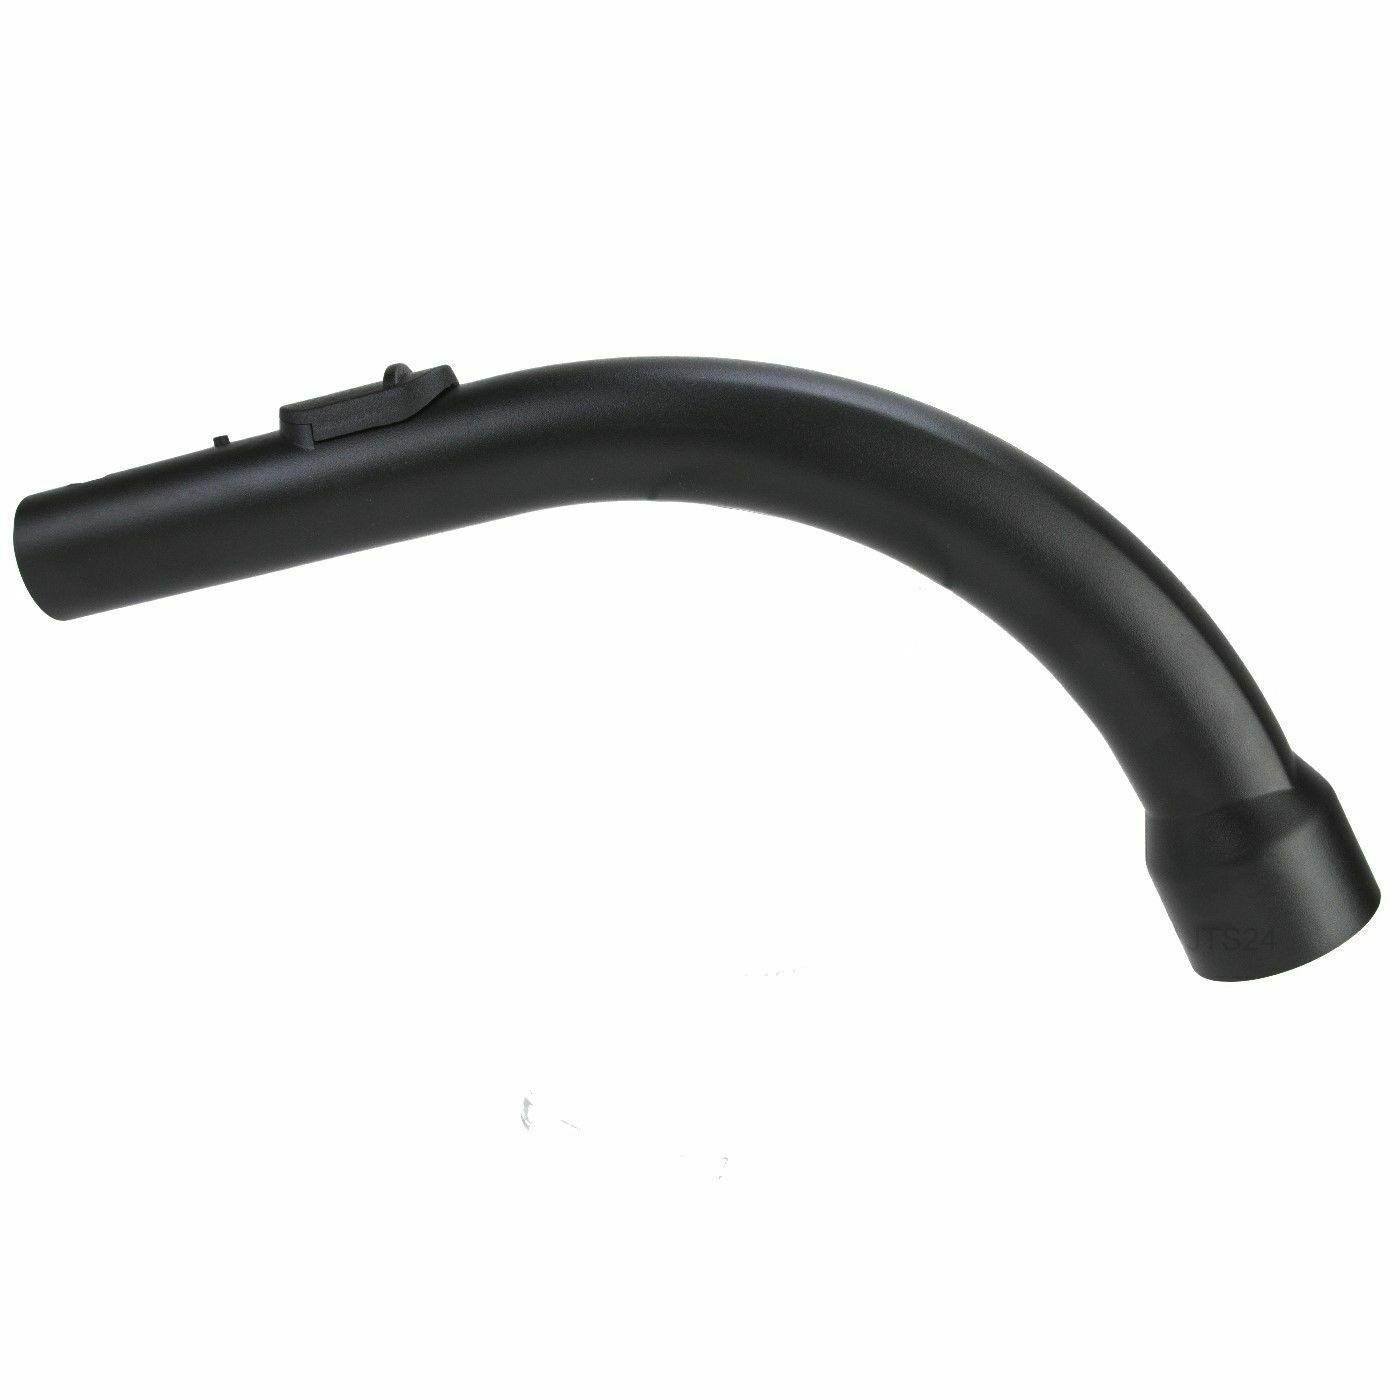 Hose Bent End Curved Handle For Miele S 5000 S 5211 S 5311 S548 S548 S500 S 500 Sparesbarn